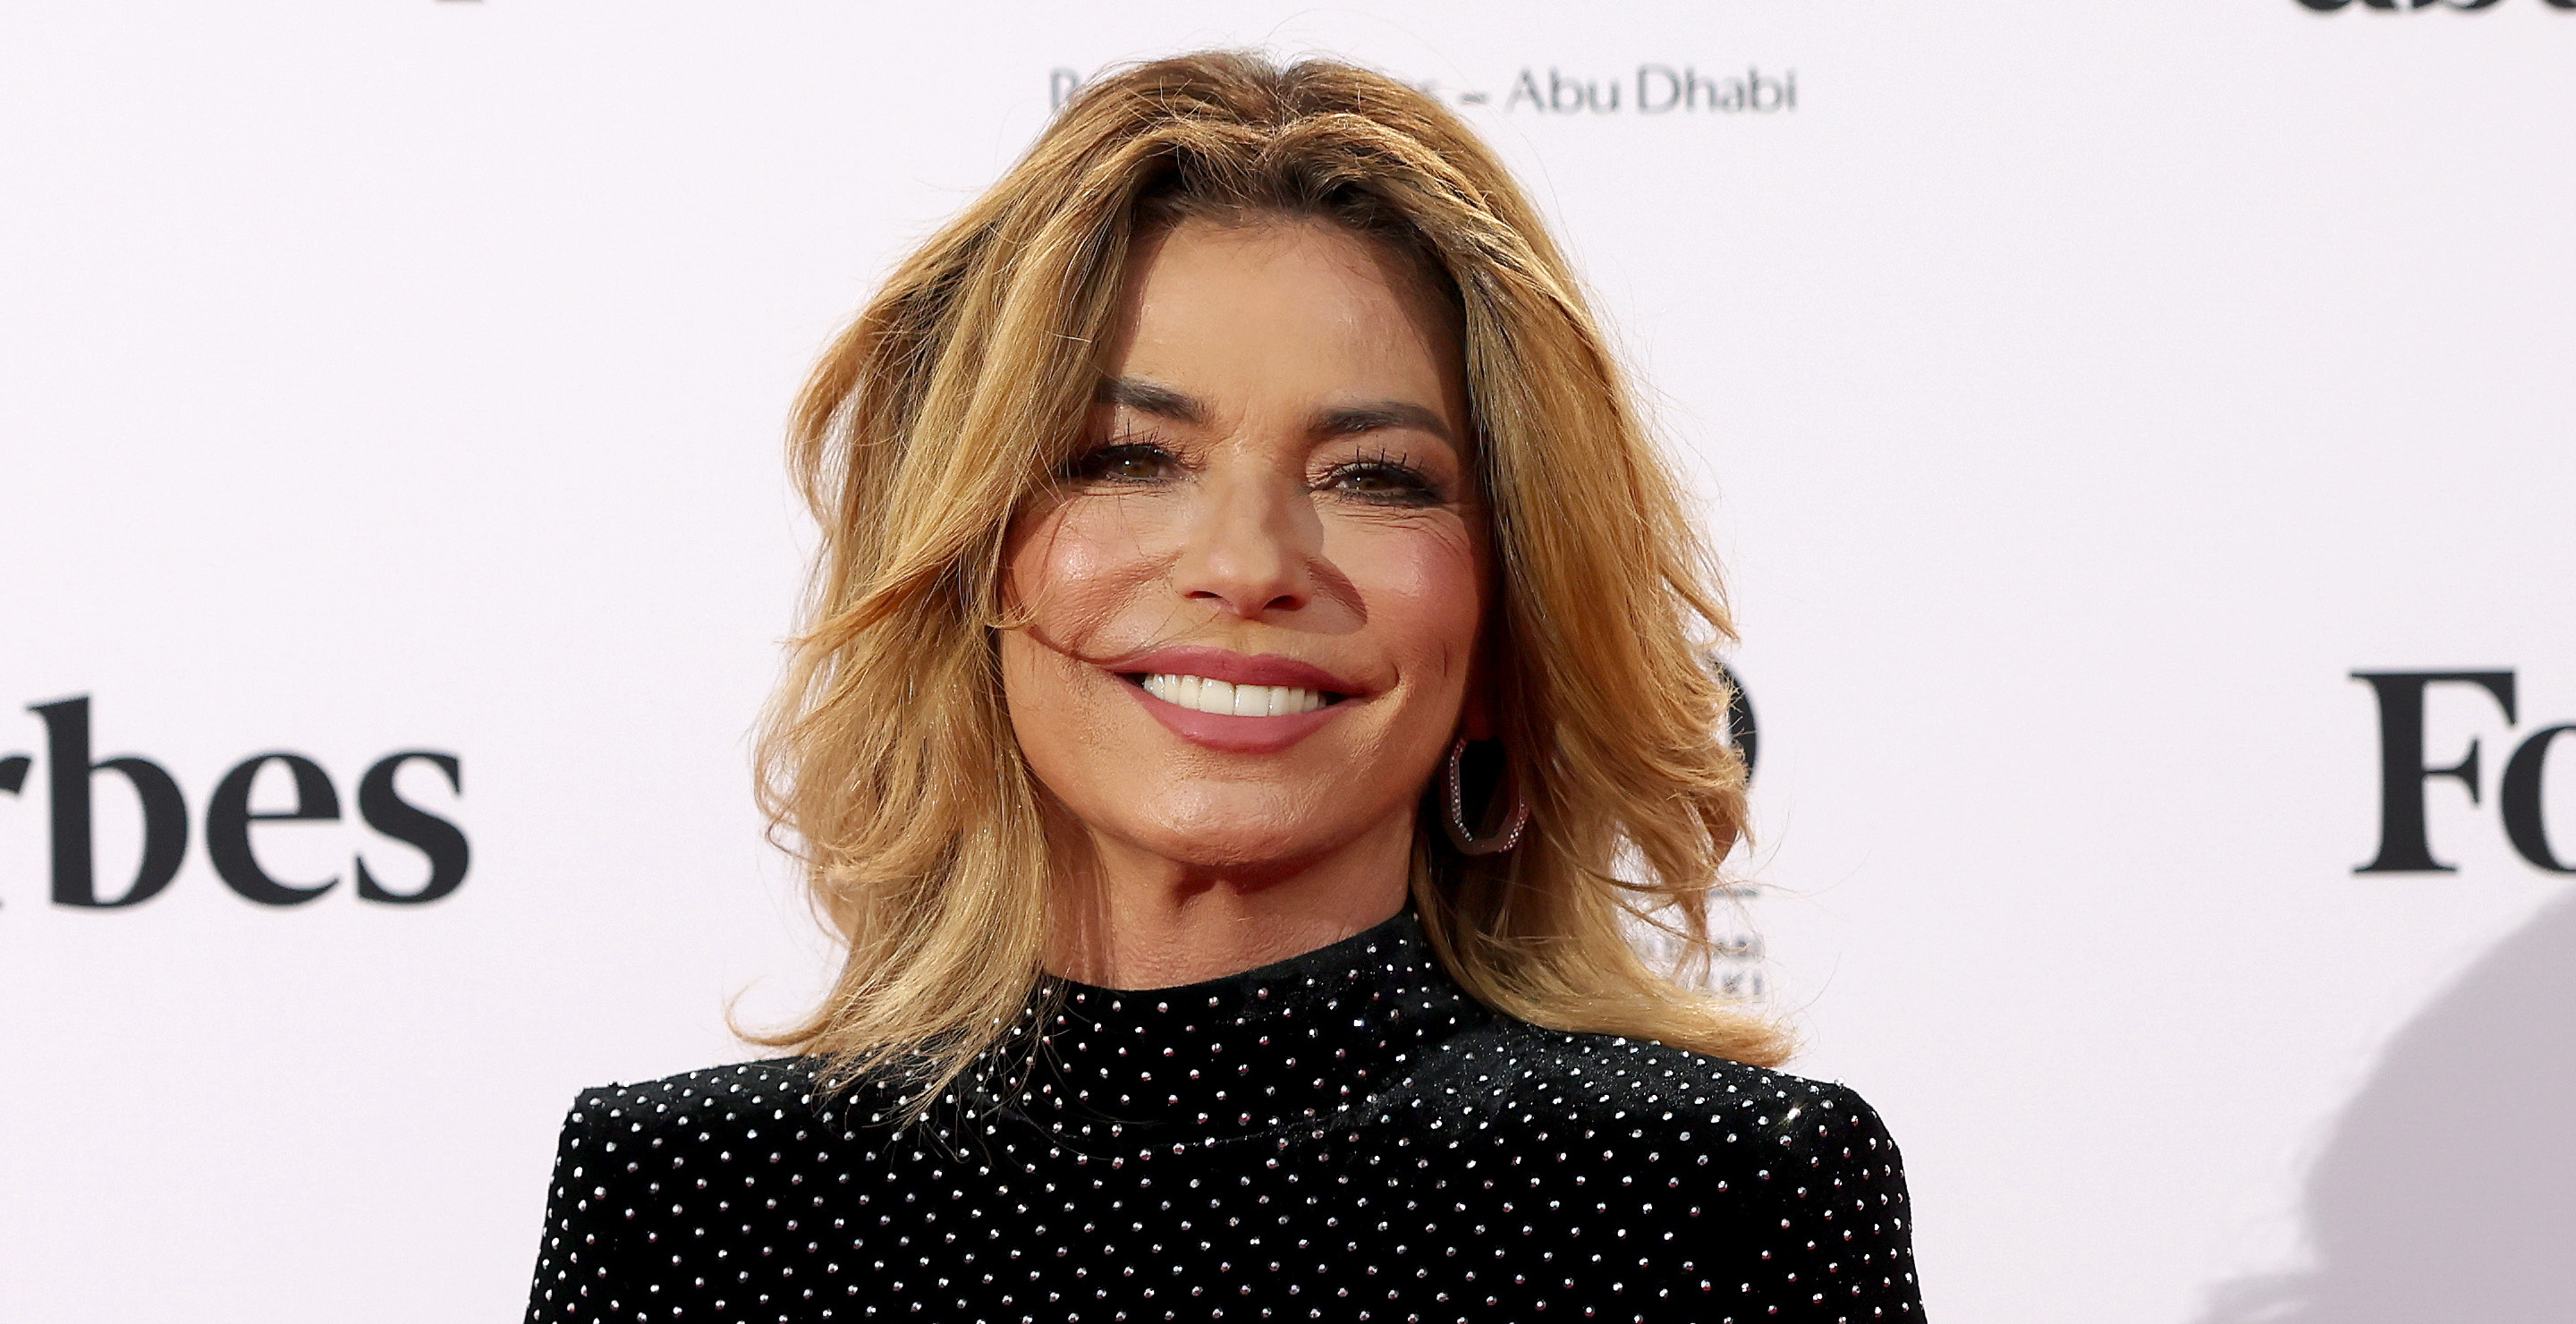 shania-twain-shocks-the-world-with-new-hairstyle